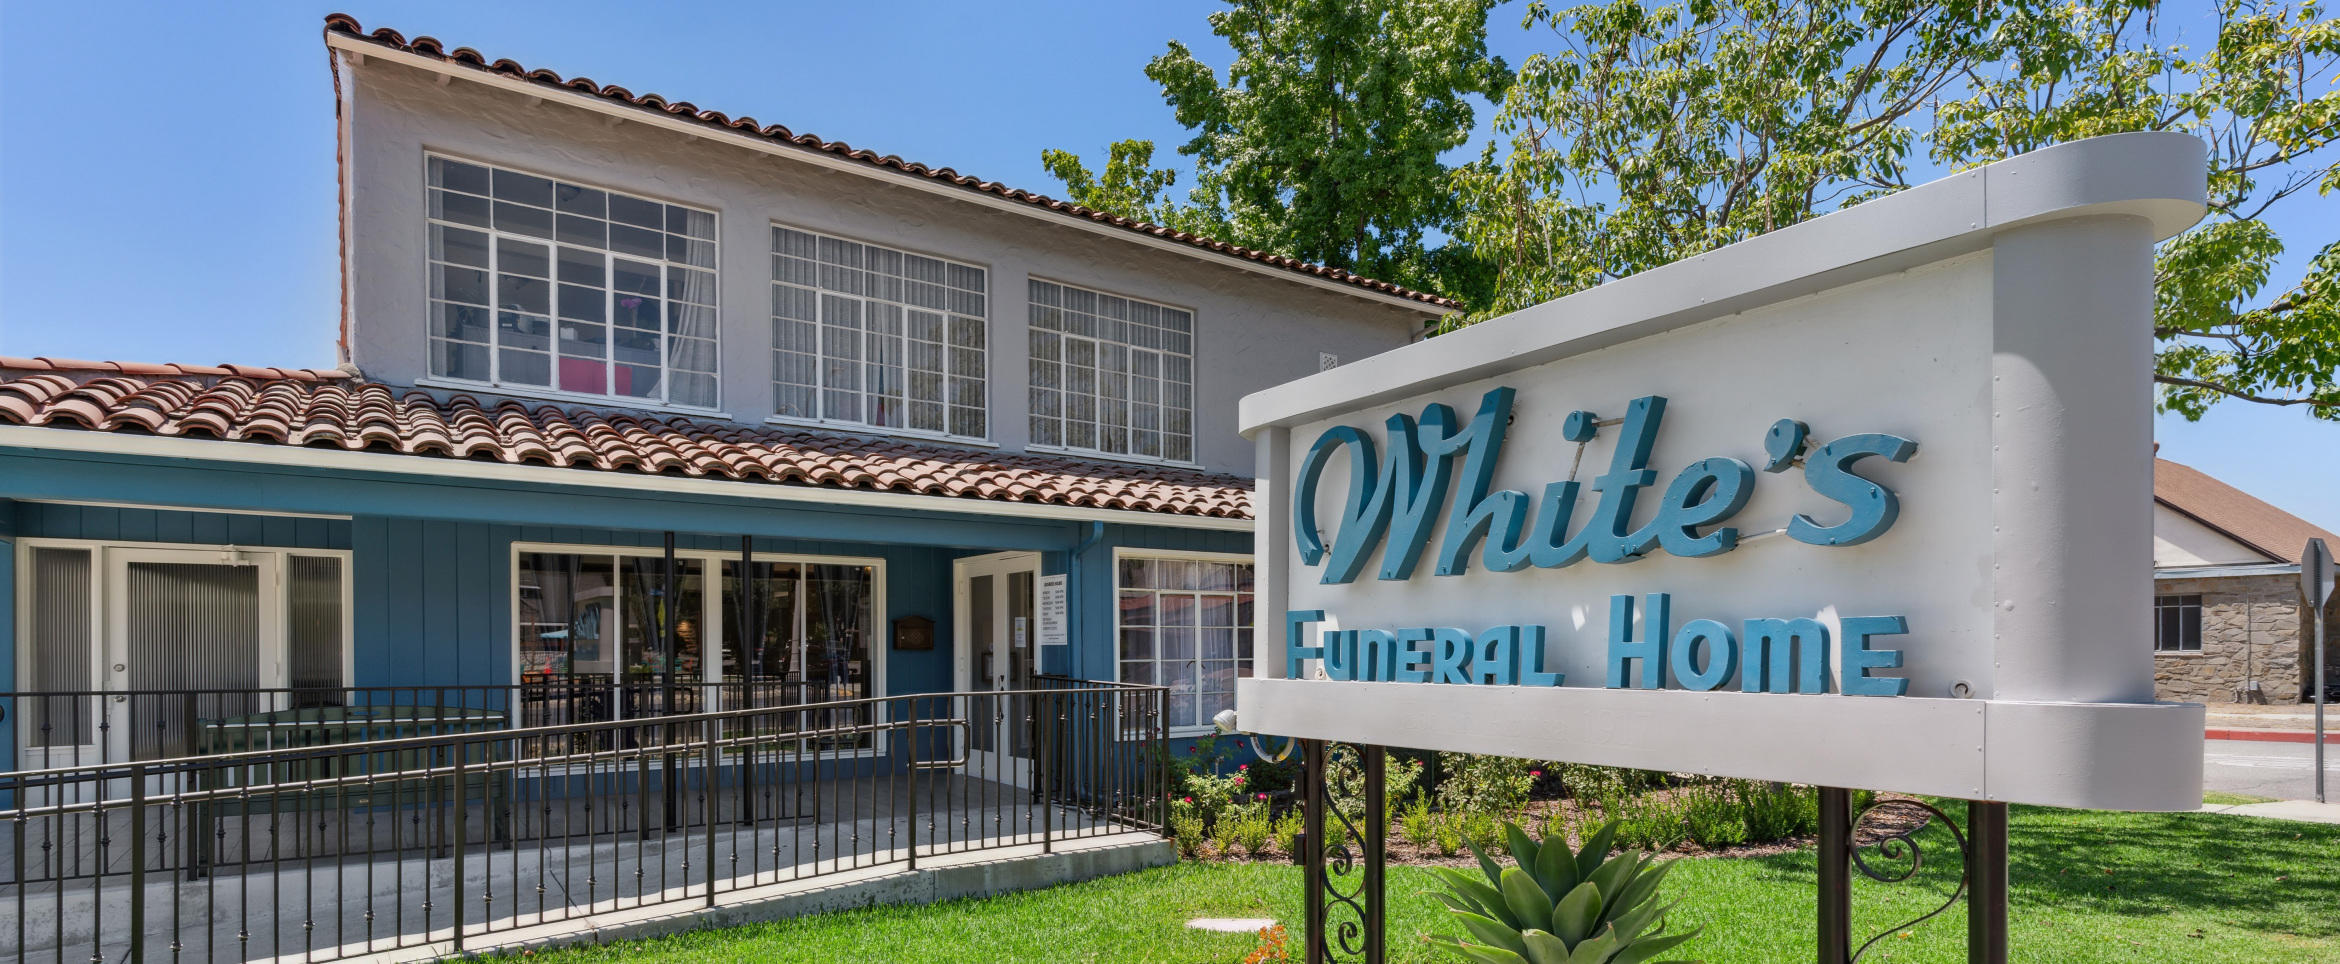 Image 2 | White's Funeral Home